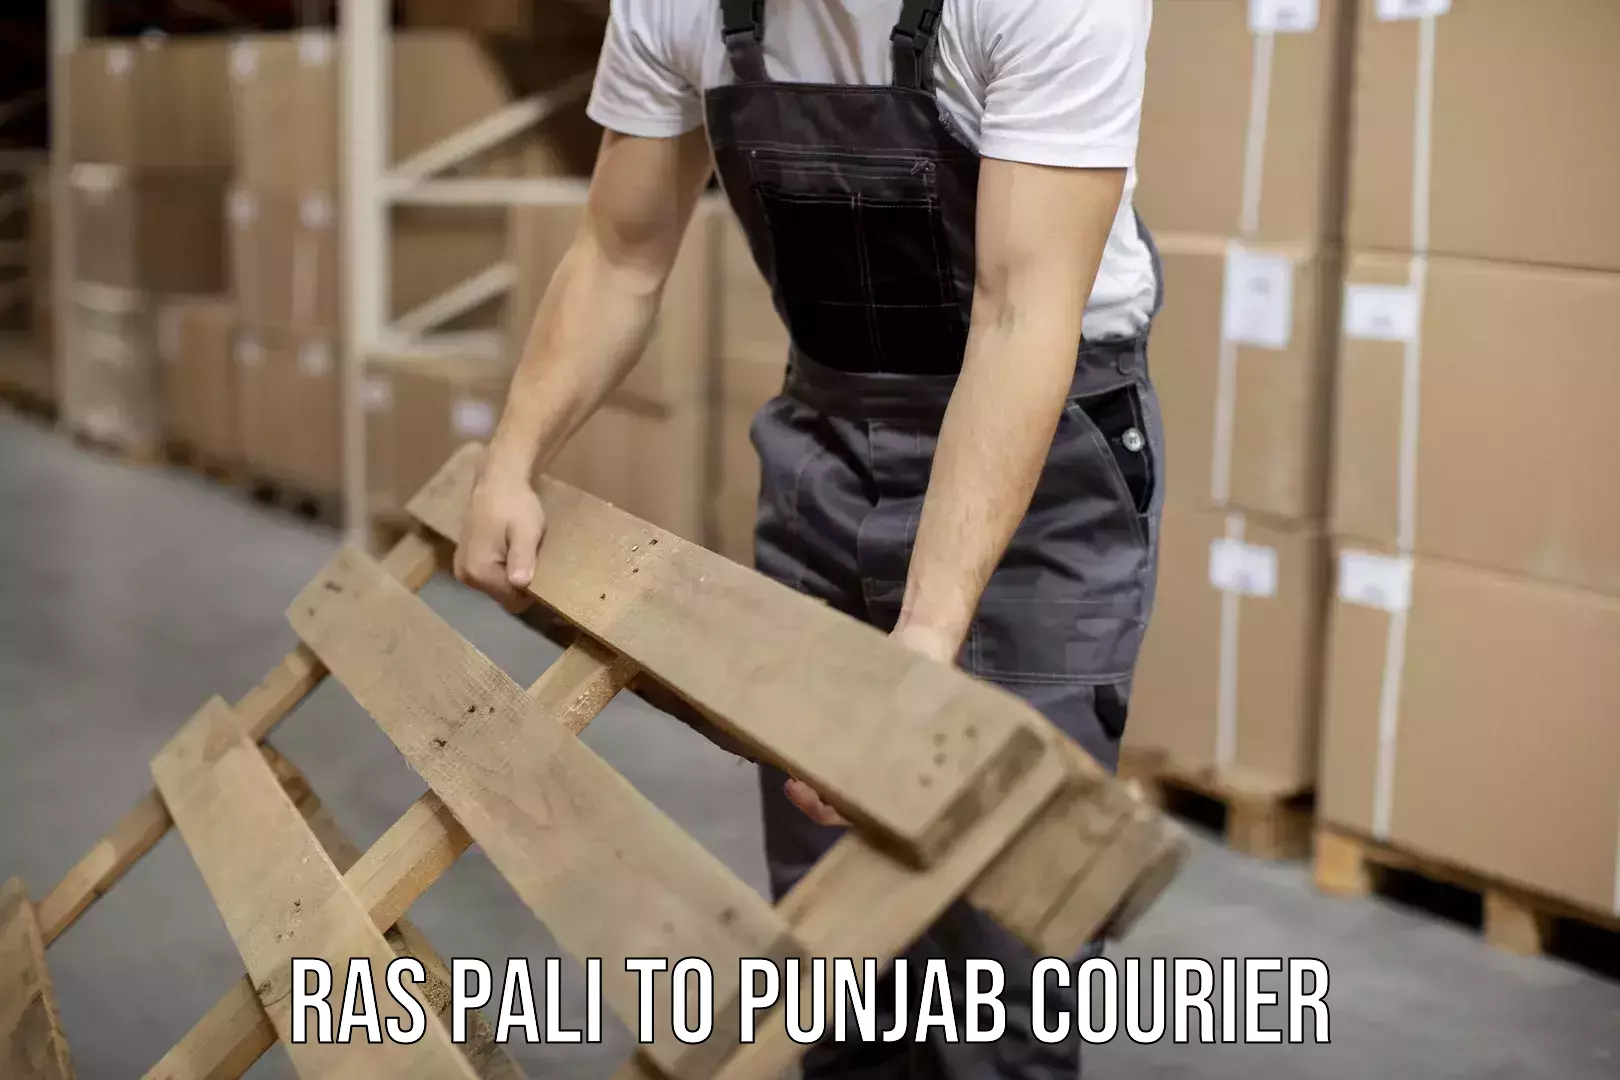 Efficient courier operations Ras Pali to Punjab